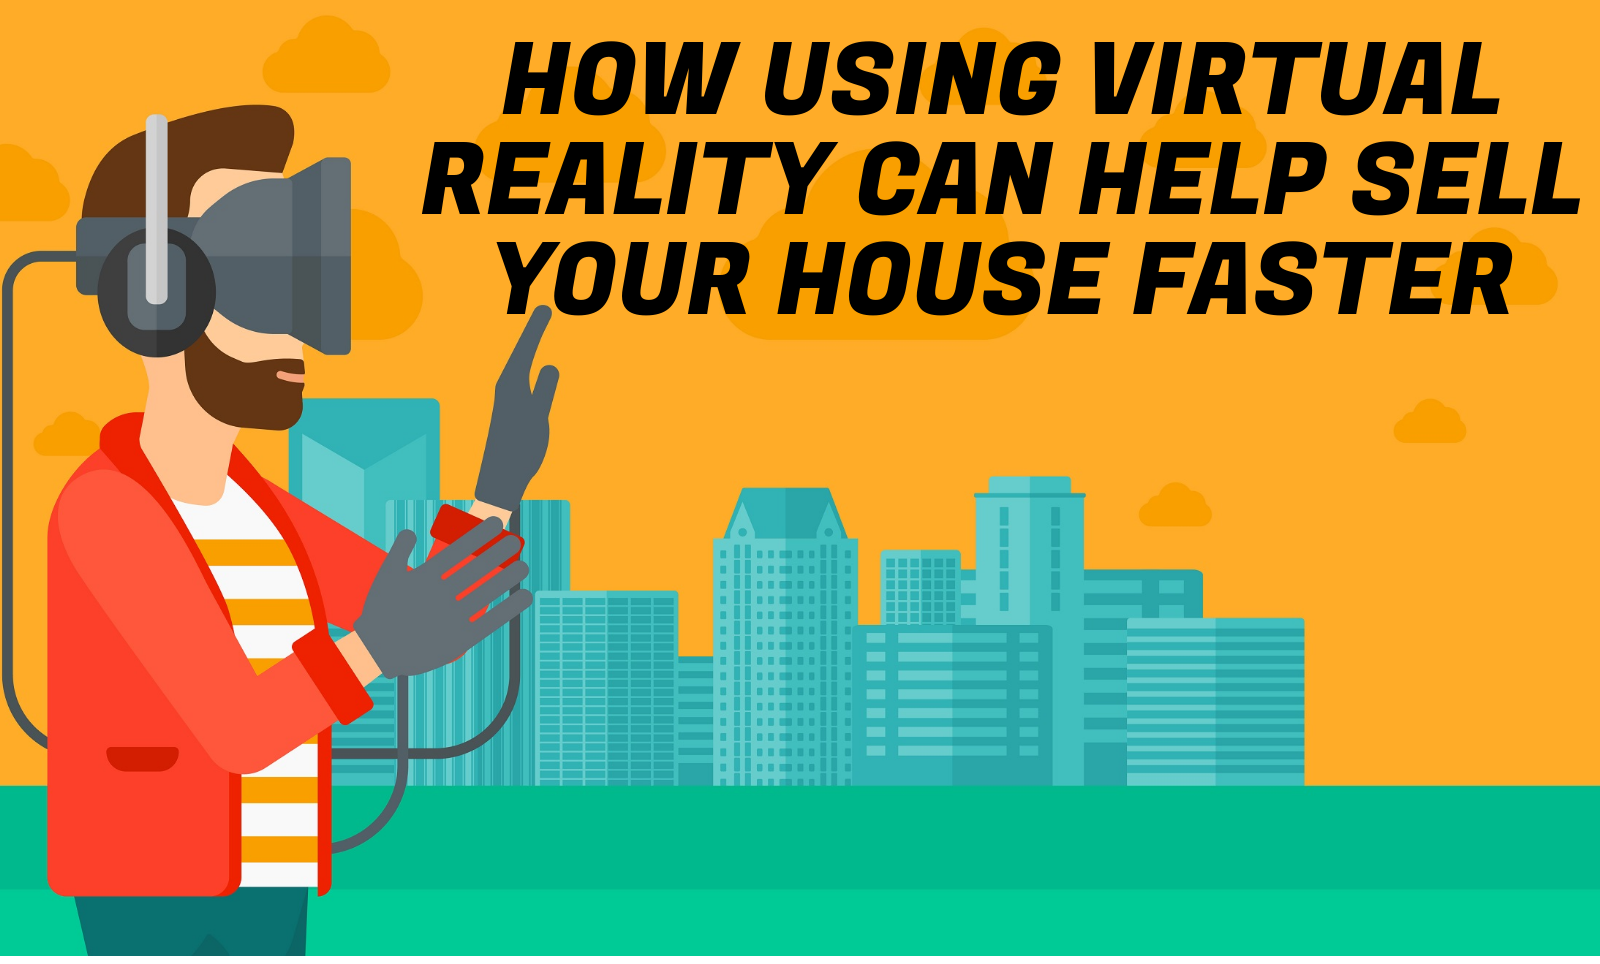 Estate agents, virtual reality and how you can use it to sell your house faster